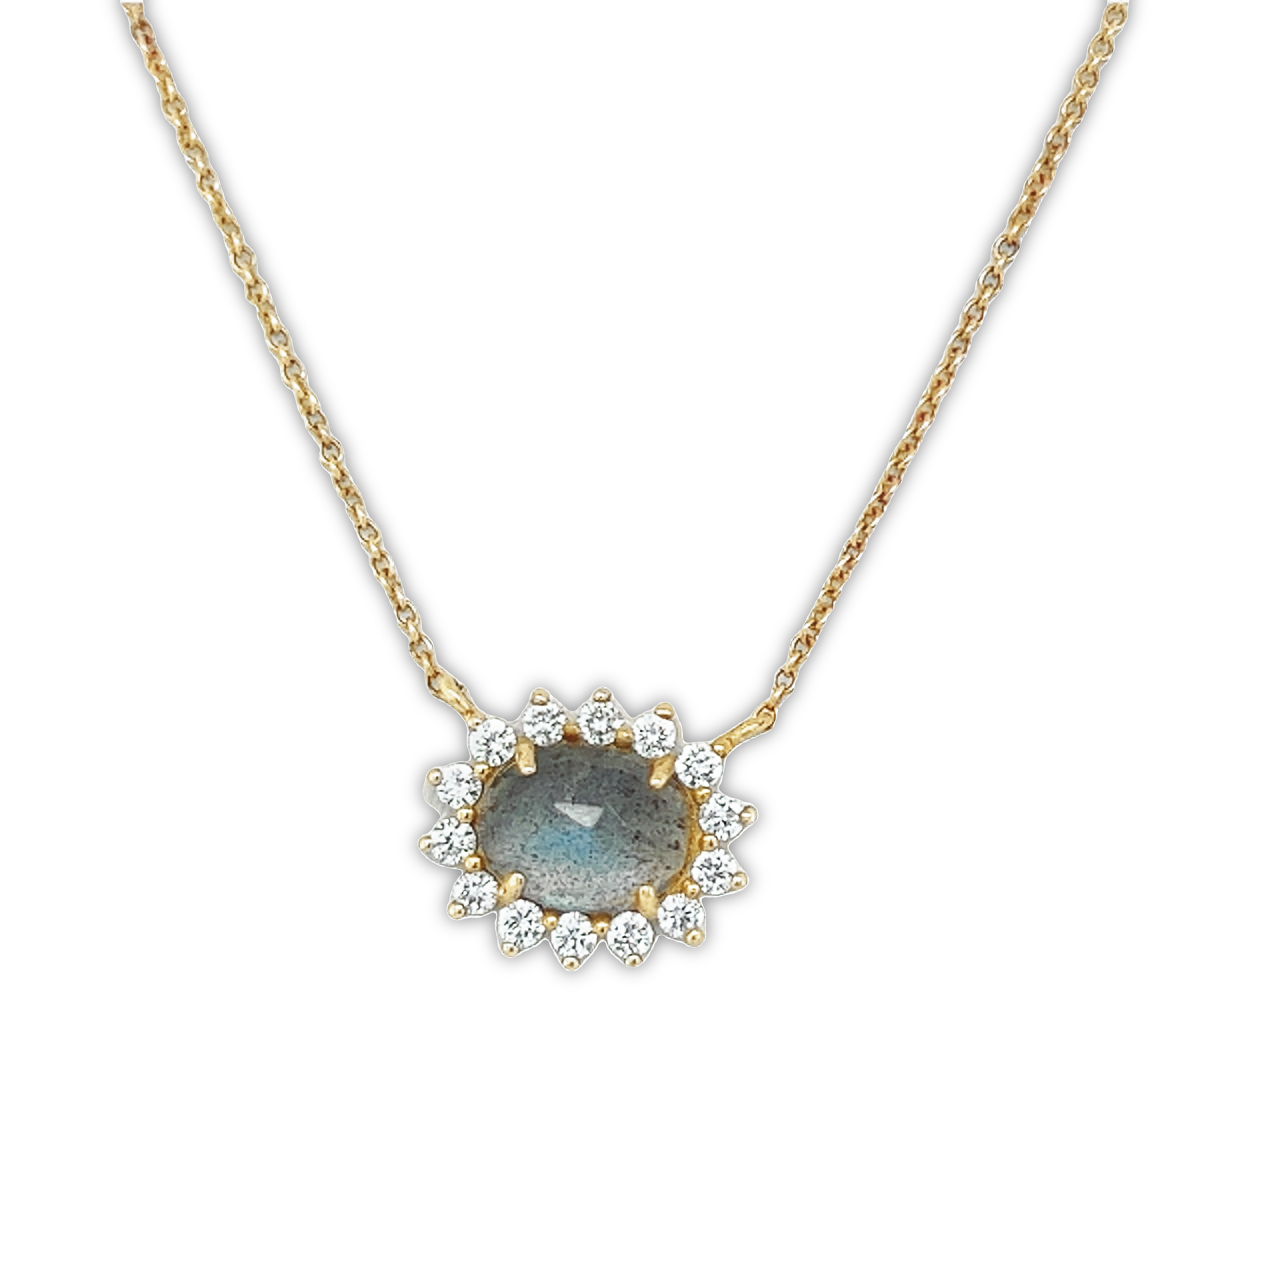 Featured image for “Labradorite Eye of Protection Necklace”